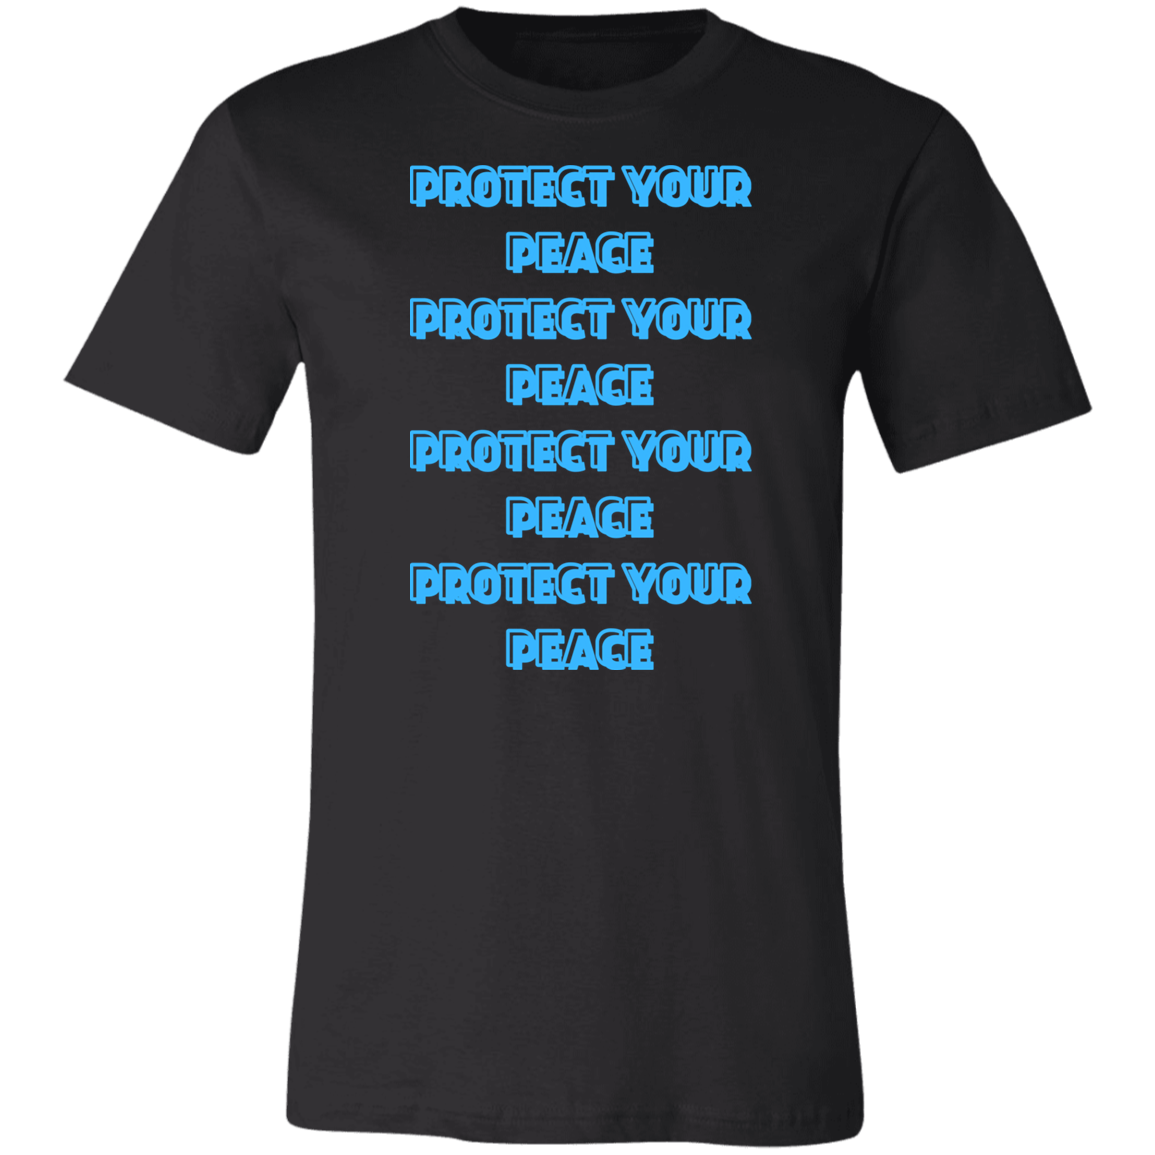 PROTECT YOUR PEACE TEE